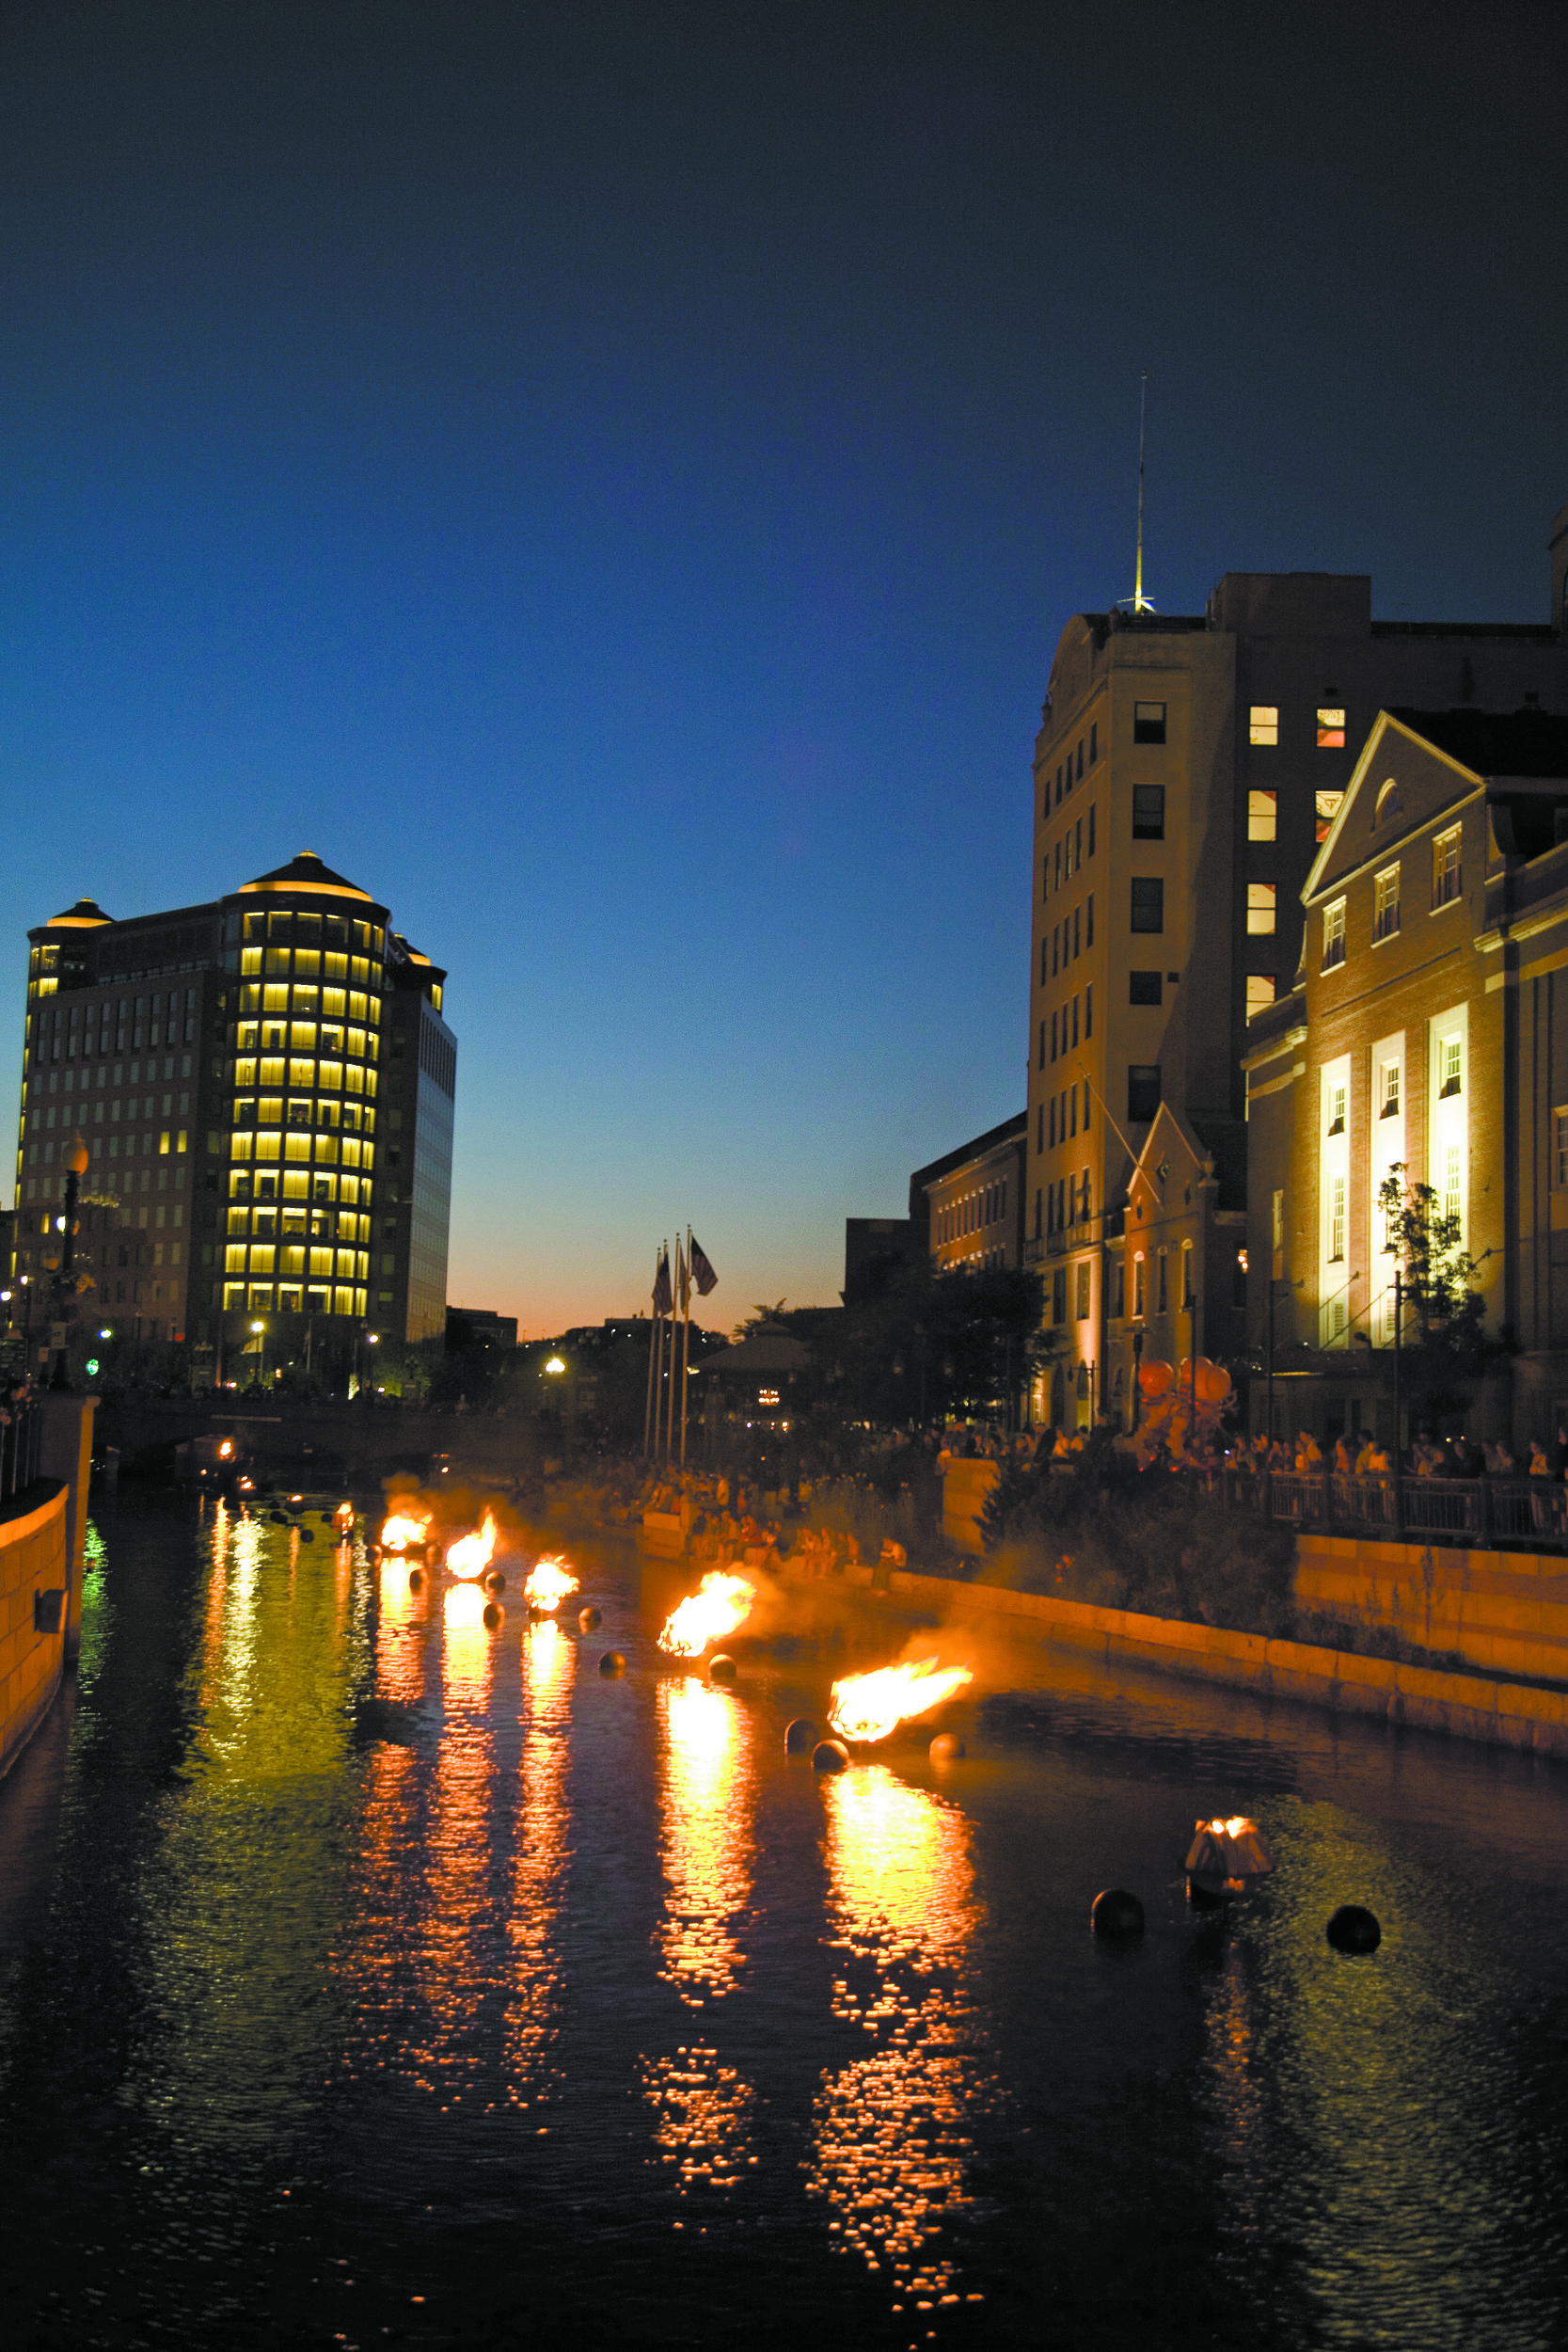 WaterFire will have a basin lighting this weekend